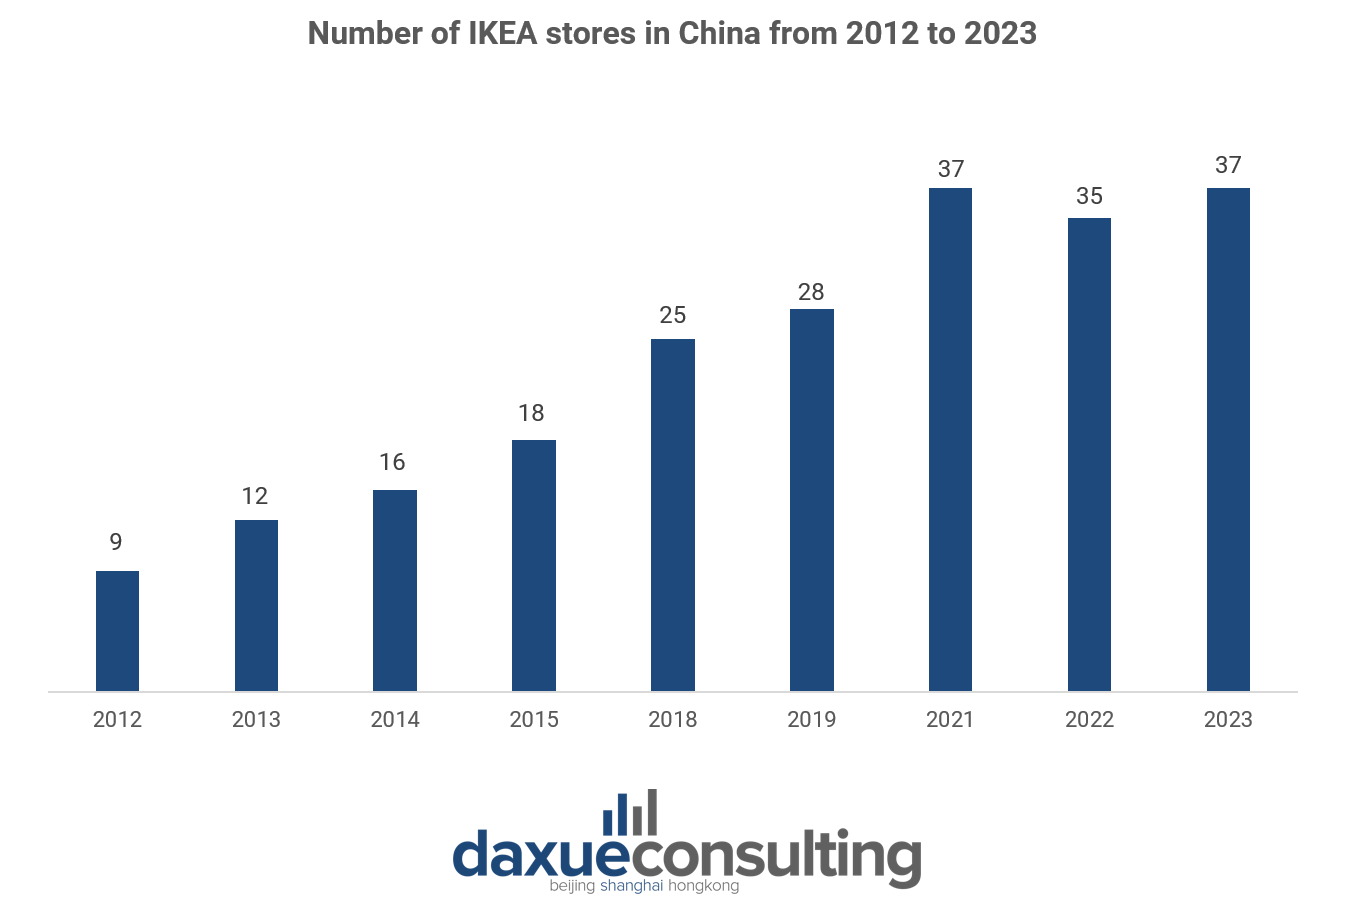 IKEA stores in China